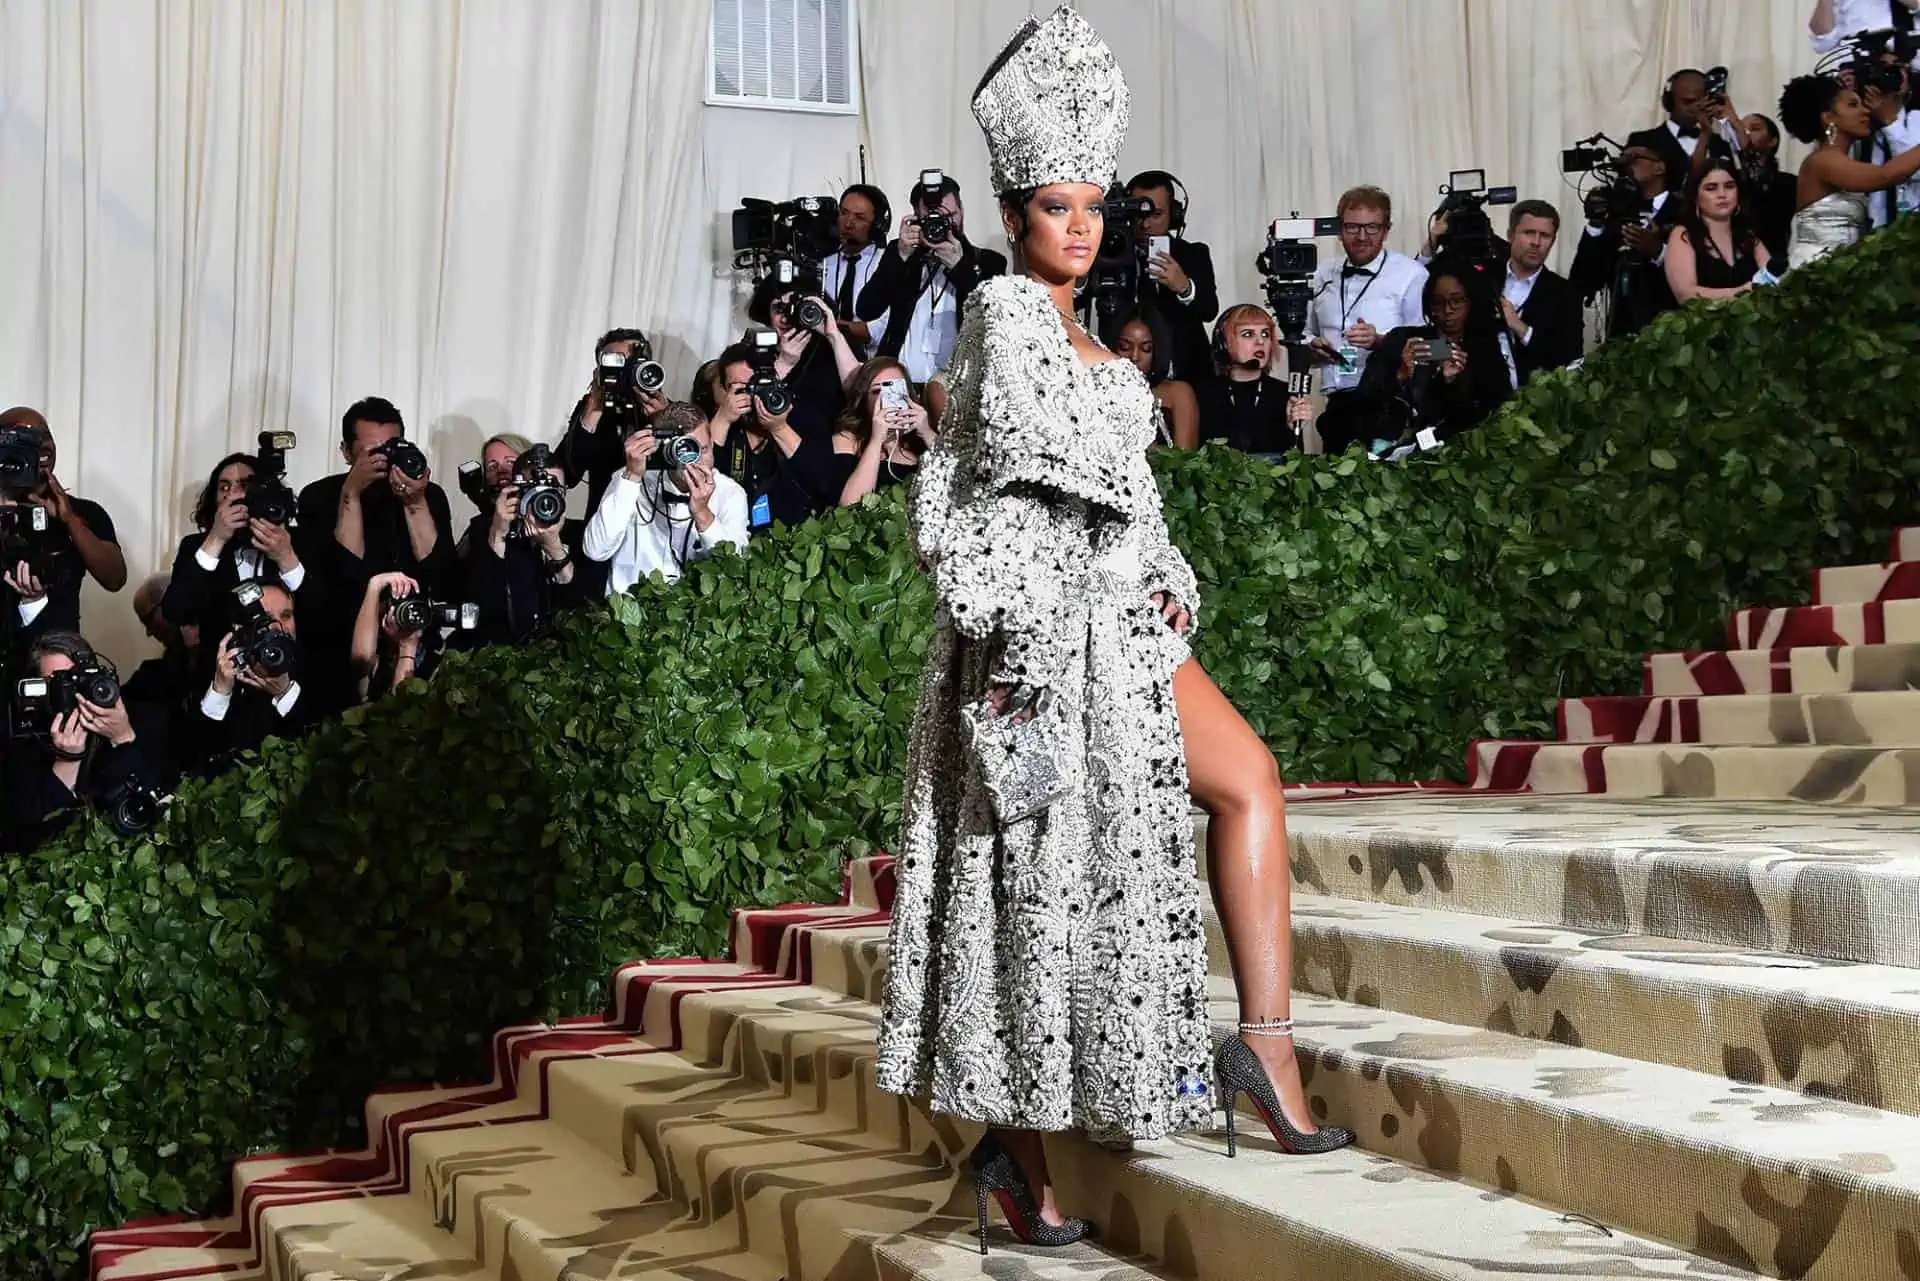 Met Gala returns to the traditional spot on the first Monday of May